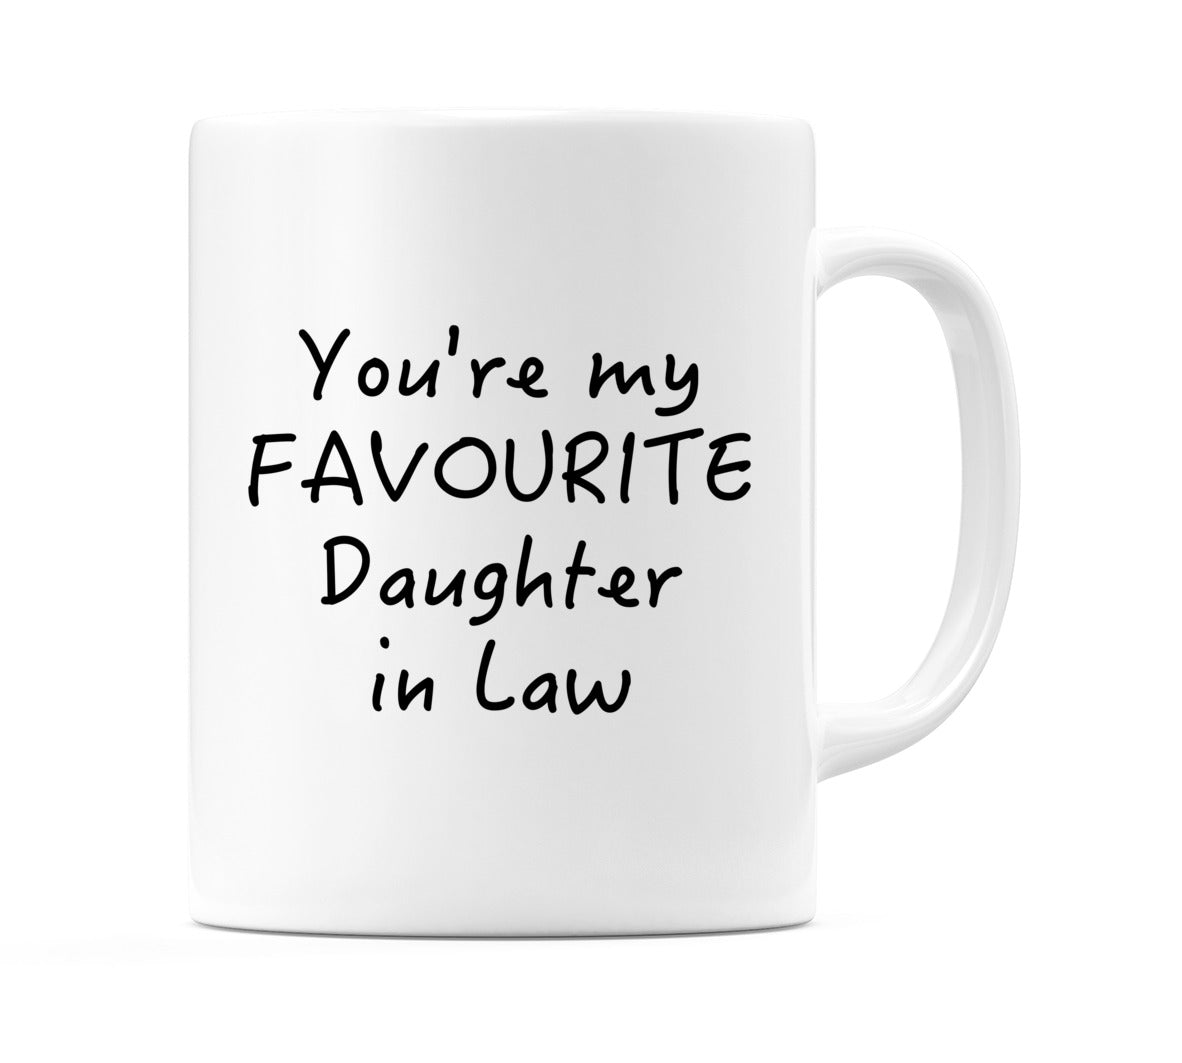 You're My Favourite Daughter in Law Mug